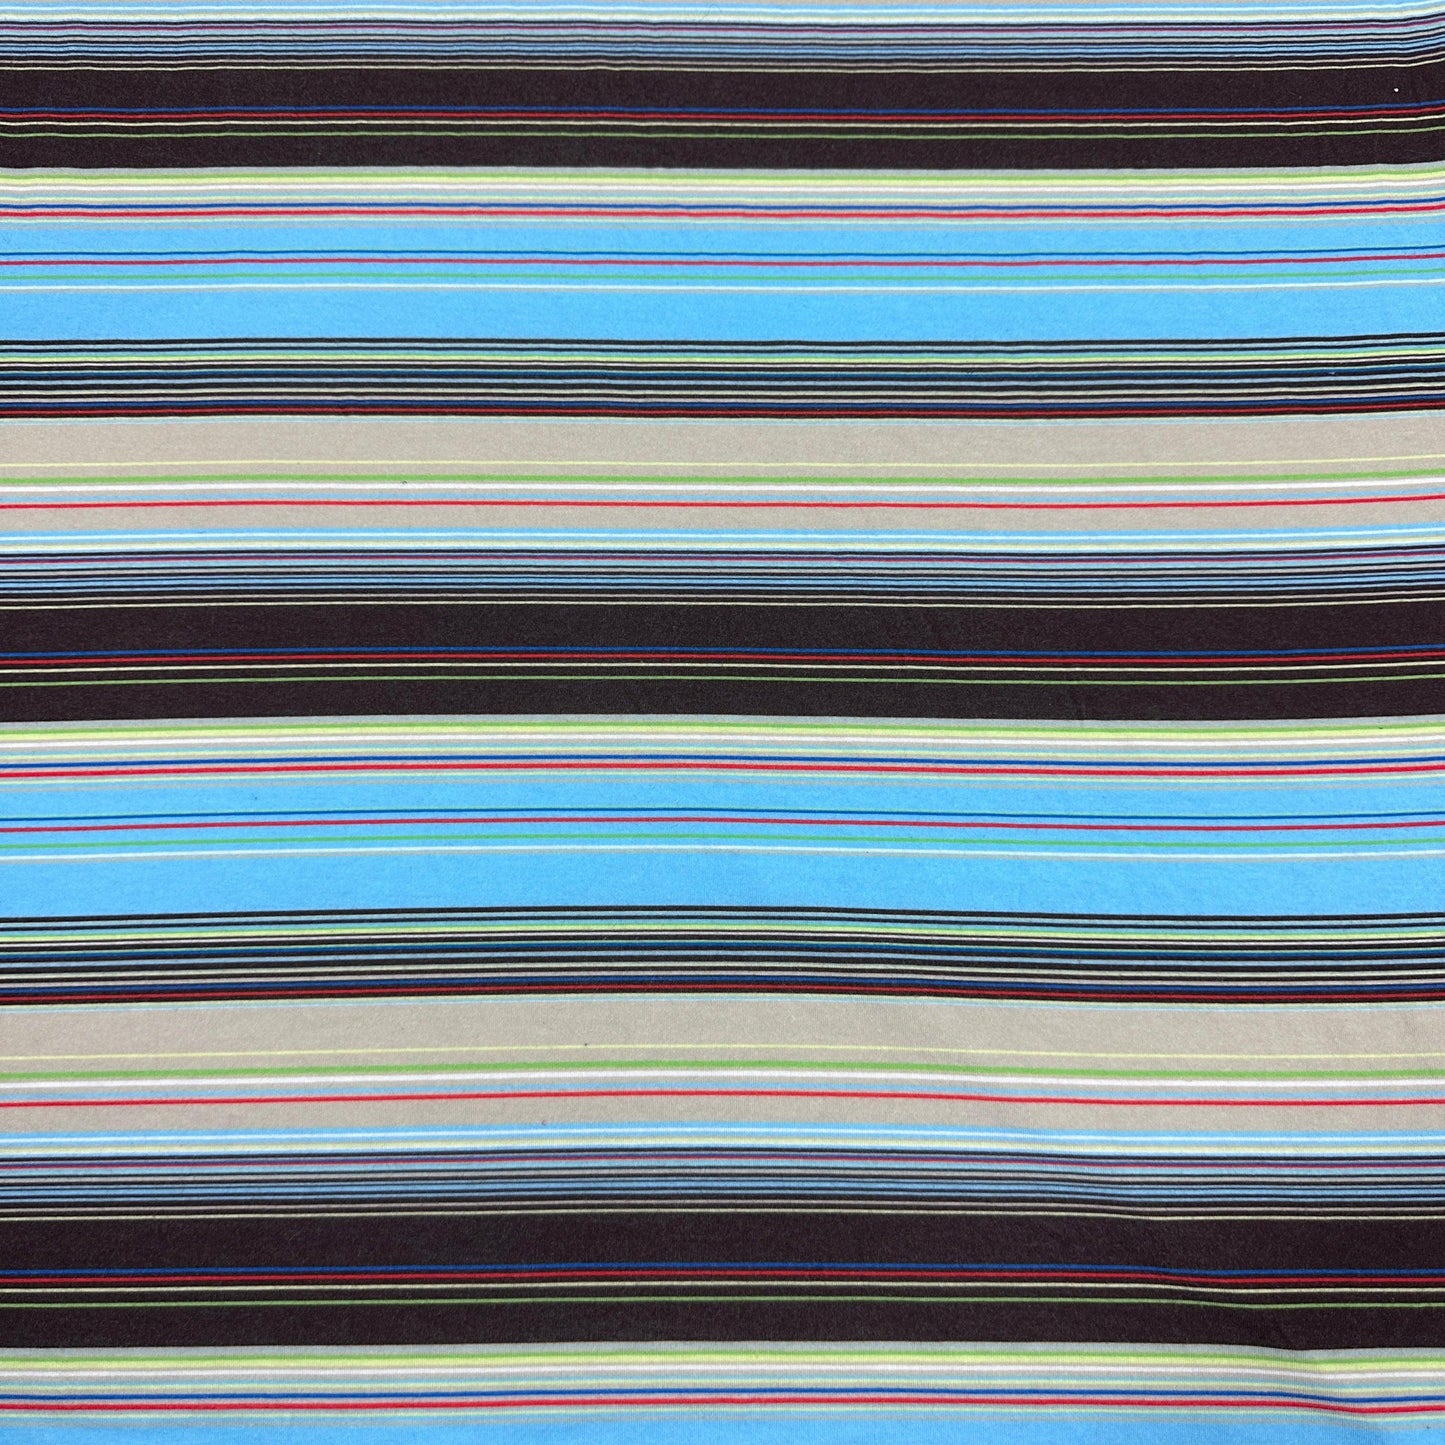 Brown and Blue Double Stripe Cotton/Spandex Jersey Fabric - Nature's Fabrics